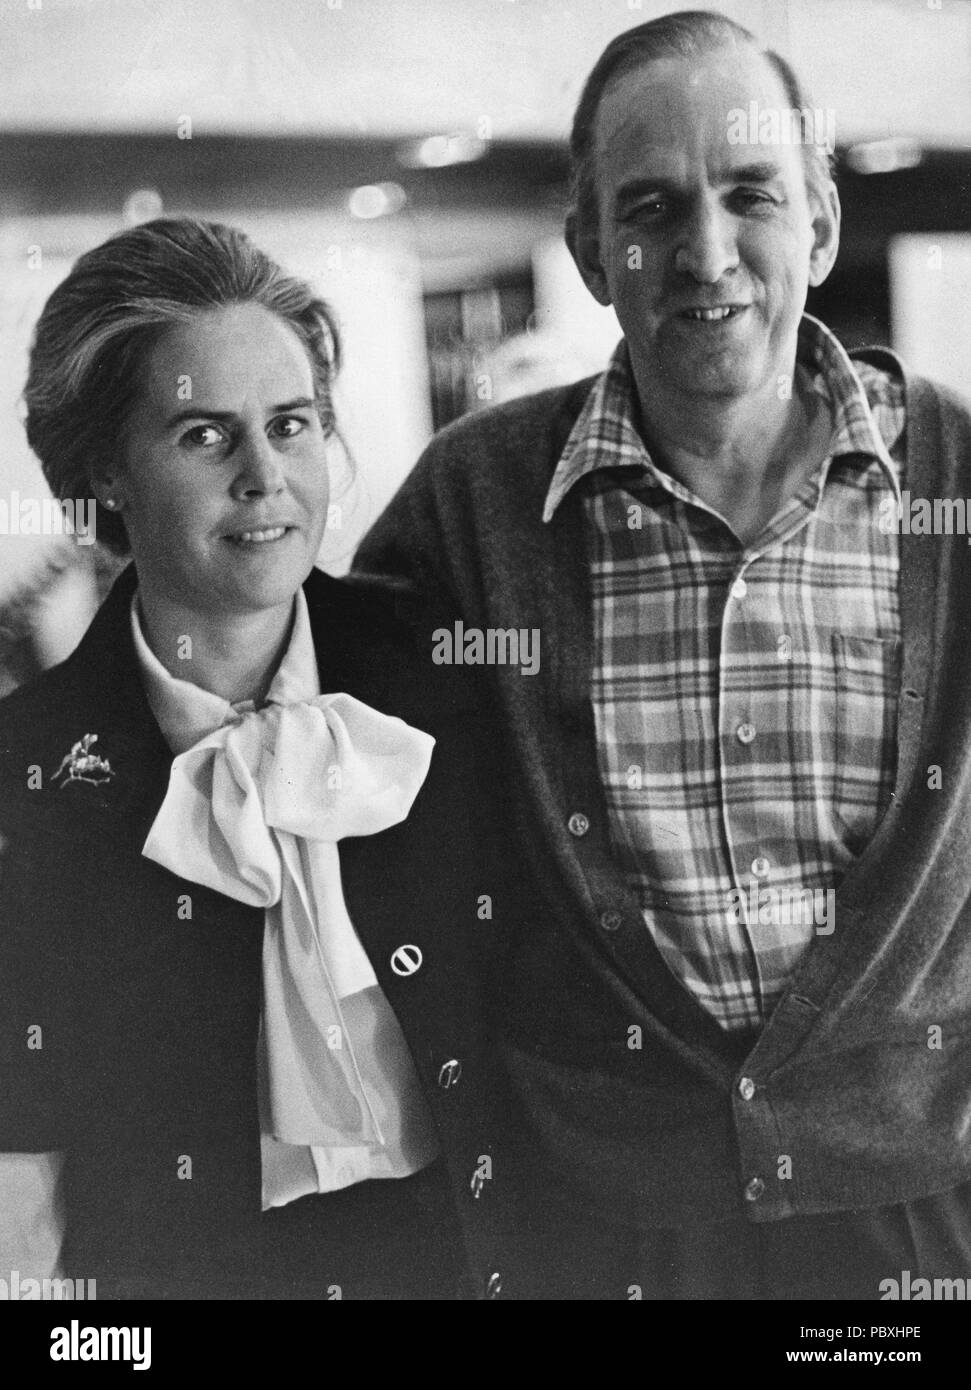 Ingmar Bergman. 1918-2007.  Swedish film director. Pictured here  in Oslo Norway 1977 in connection with the presentation of his film Autumn Sonata which he wrote and directed. Here together with his wife Ingrid von Rosen. The film was shot in a film studio in Oslo and the dialoge and most of the crew and actors were Swedish. The film had it's premiere on October 8 1978. Stock Photo